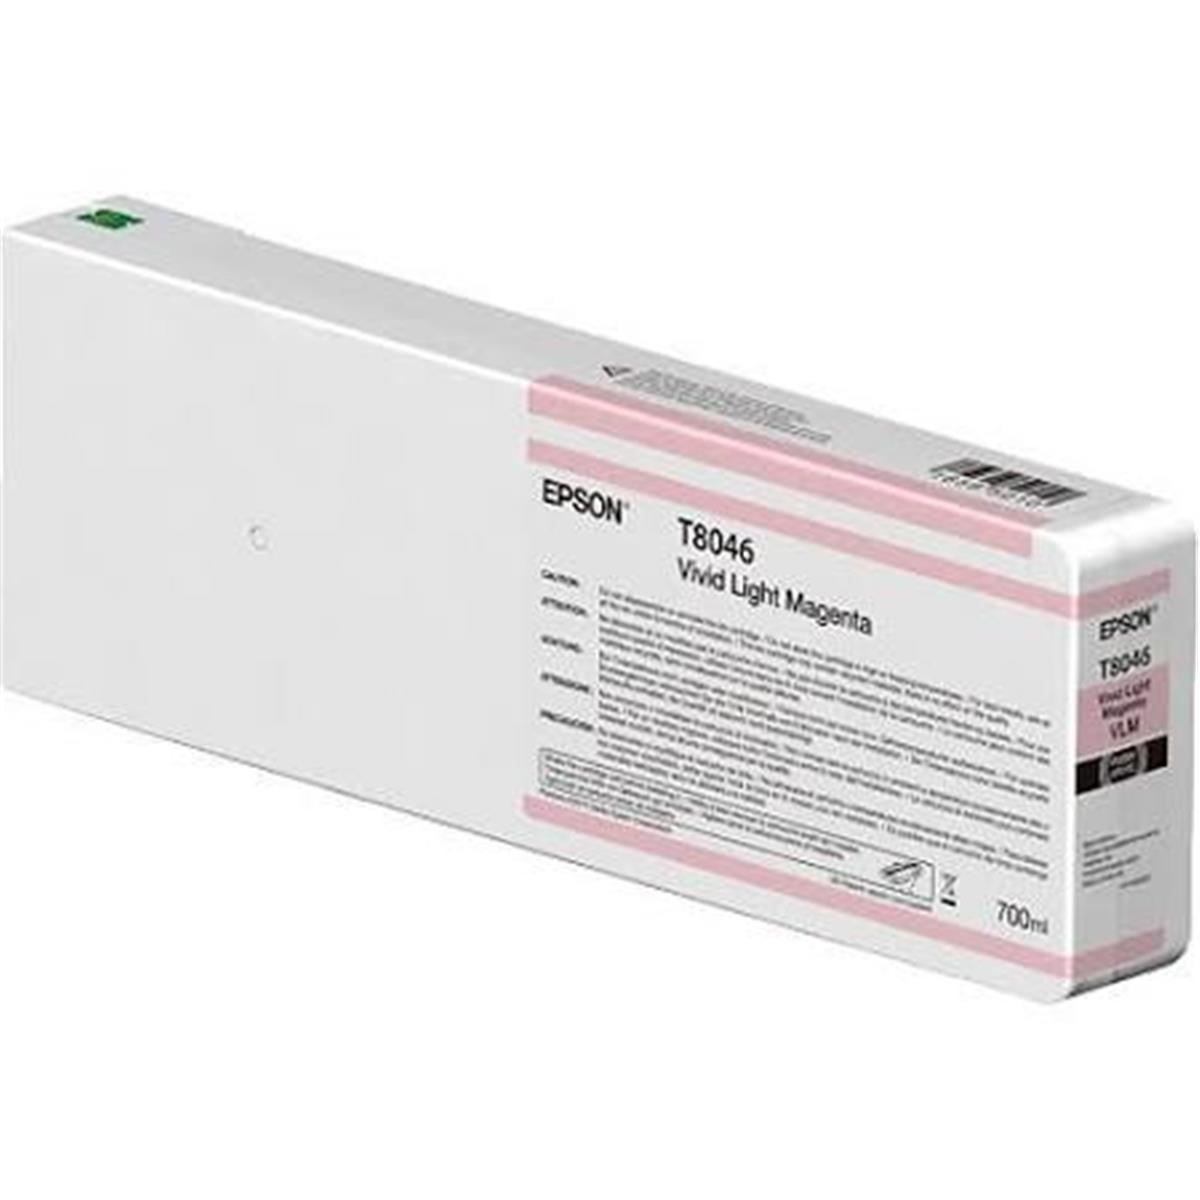 Picture of Epson EPST804600 P7000 - X High Yield Light Magenta Ink Cartridge